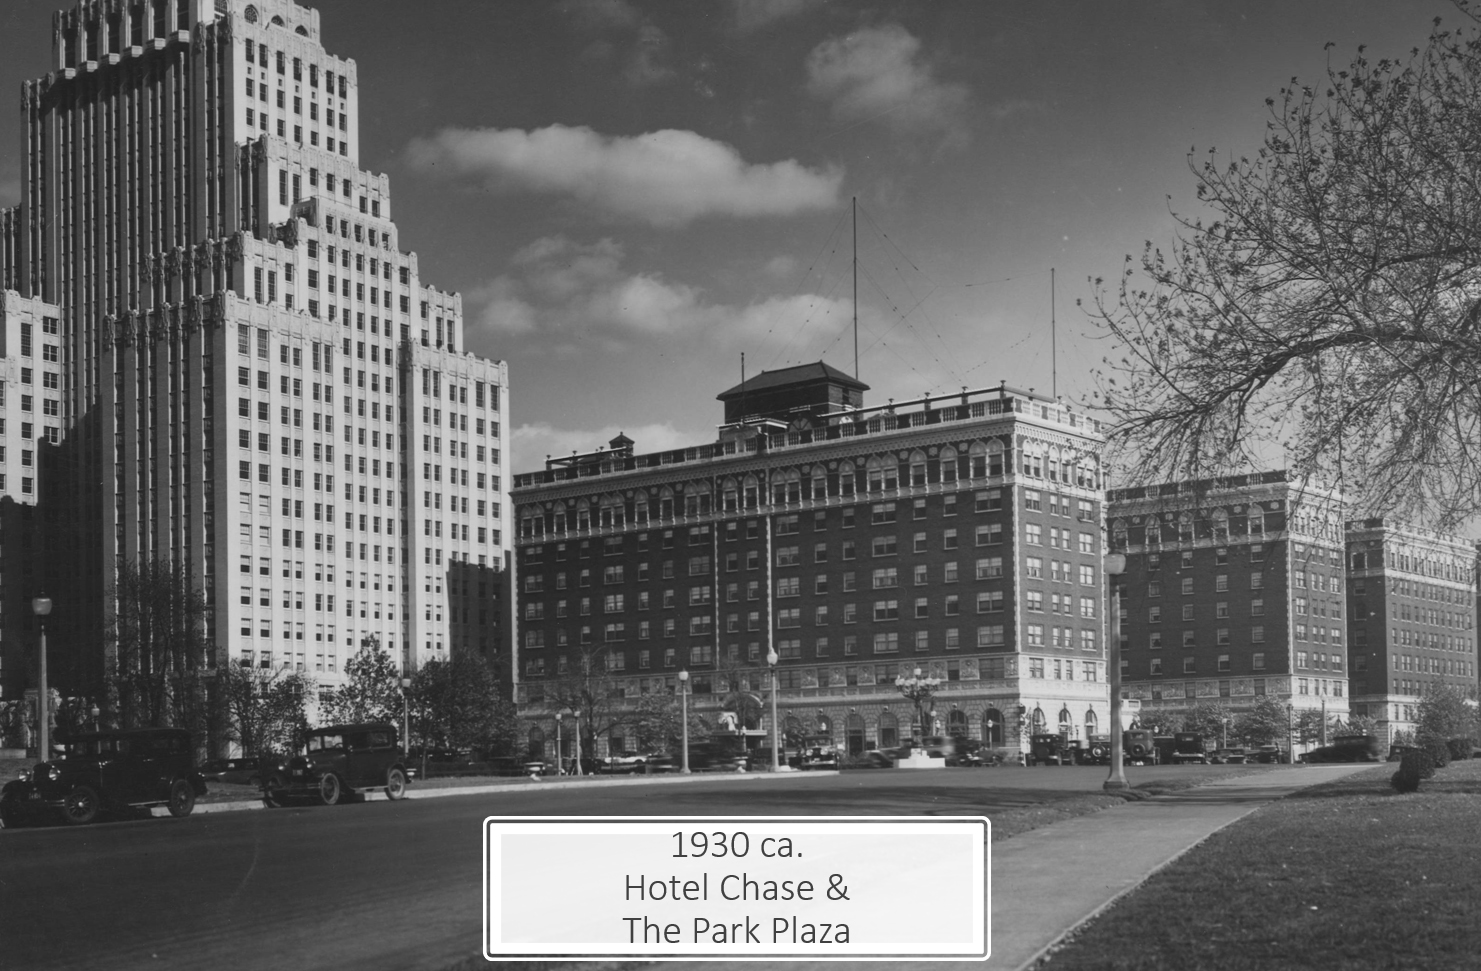 black and white image of hotel; copy overlay stating image is from 1930